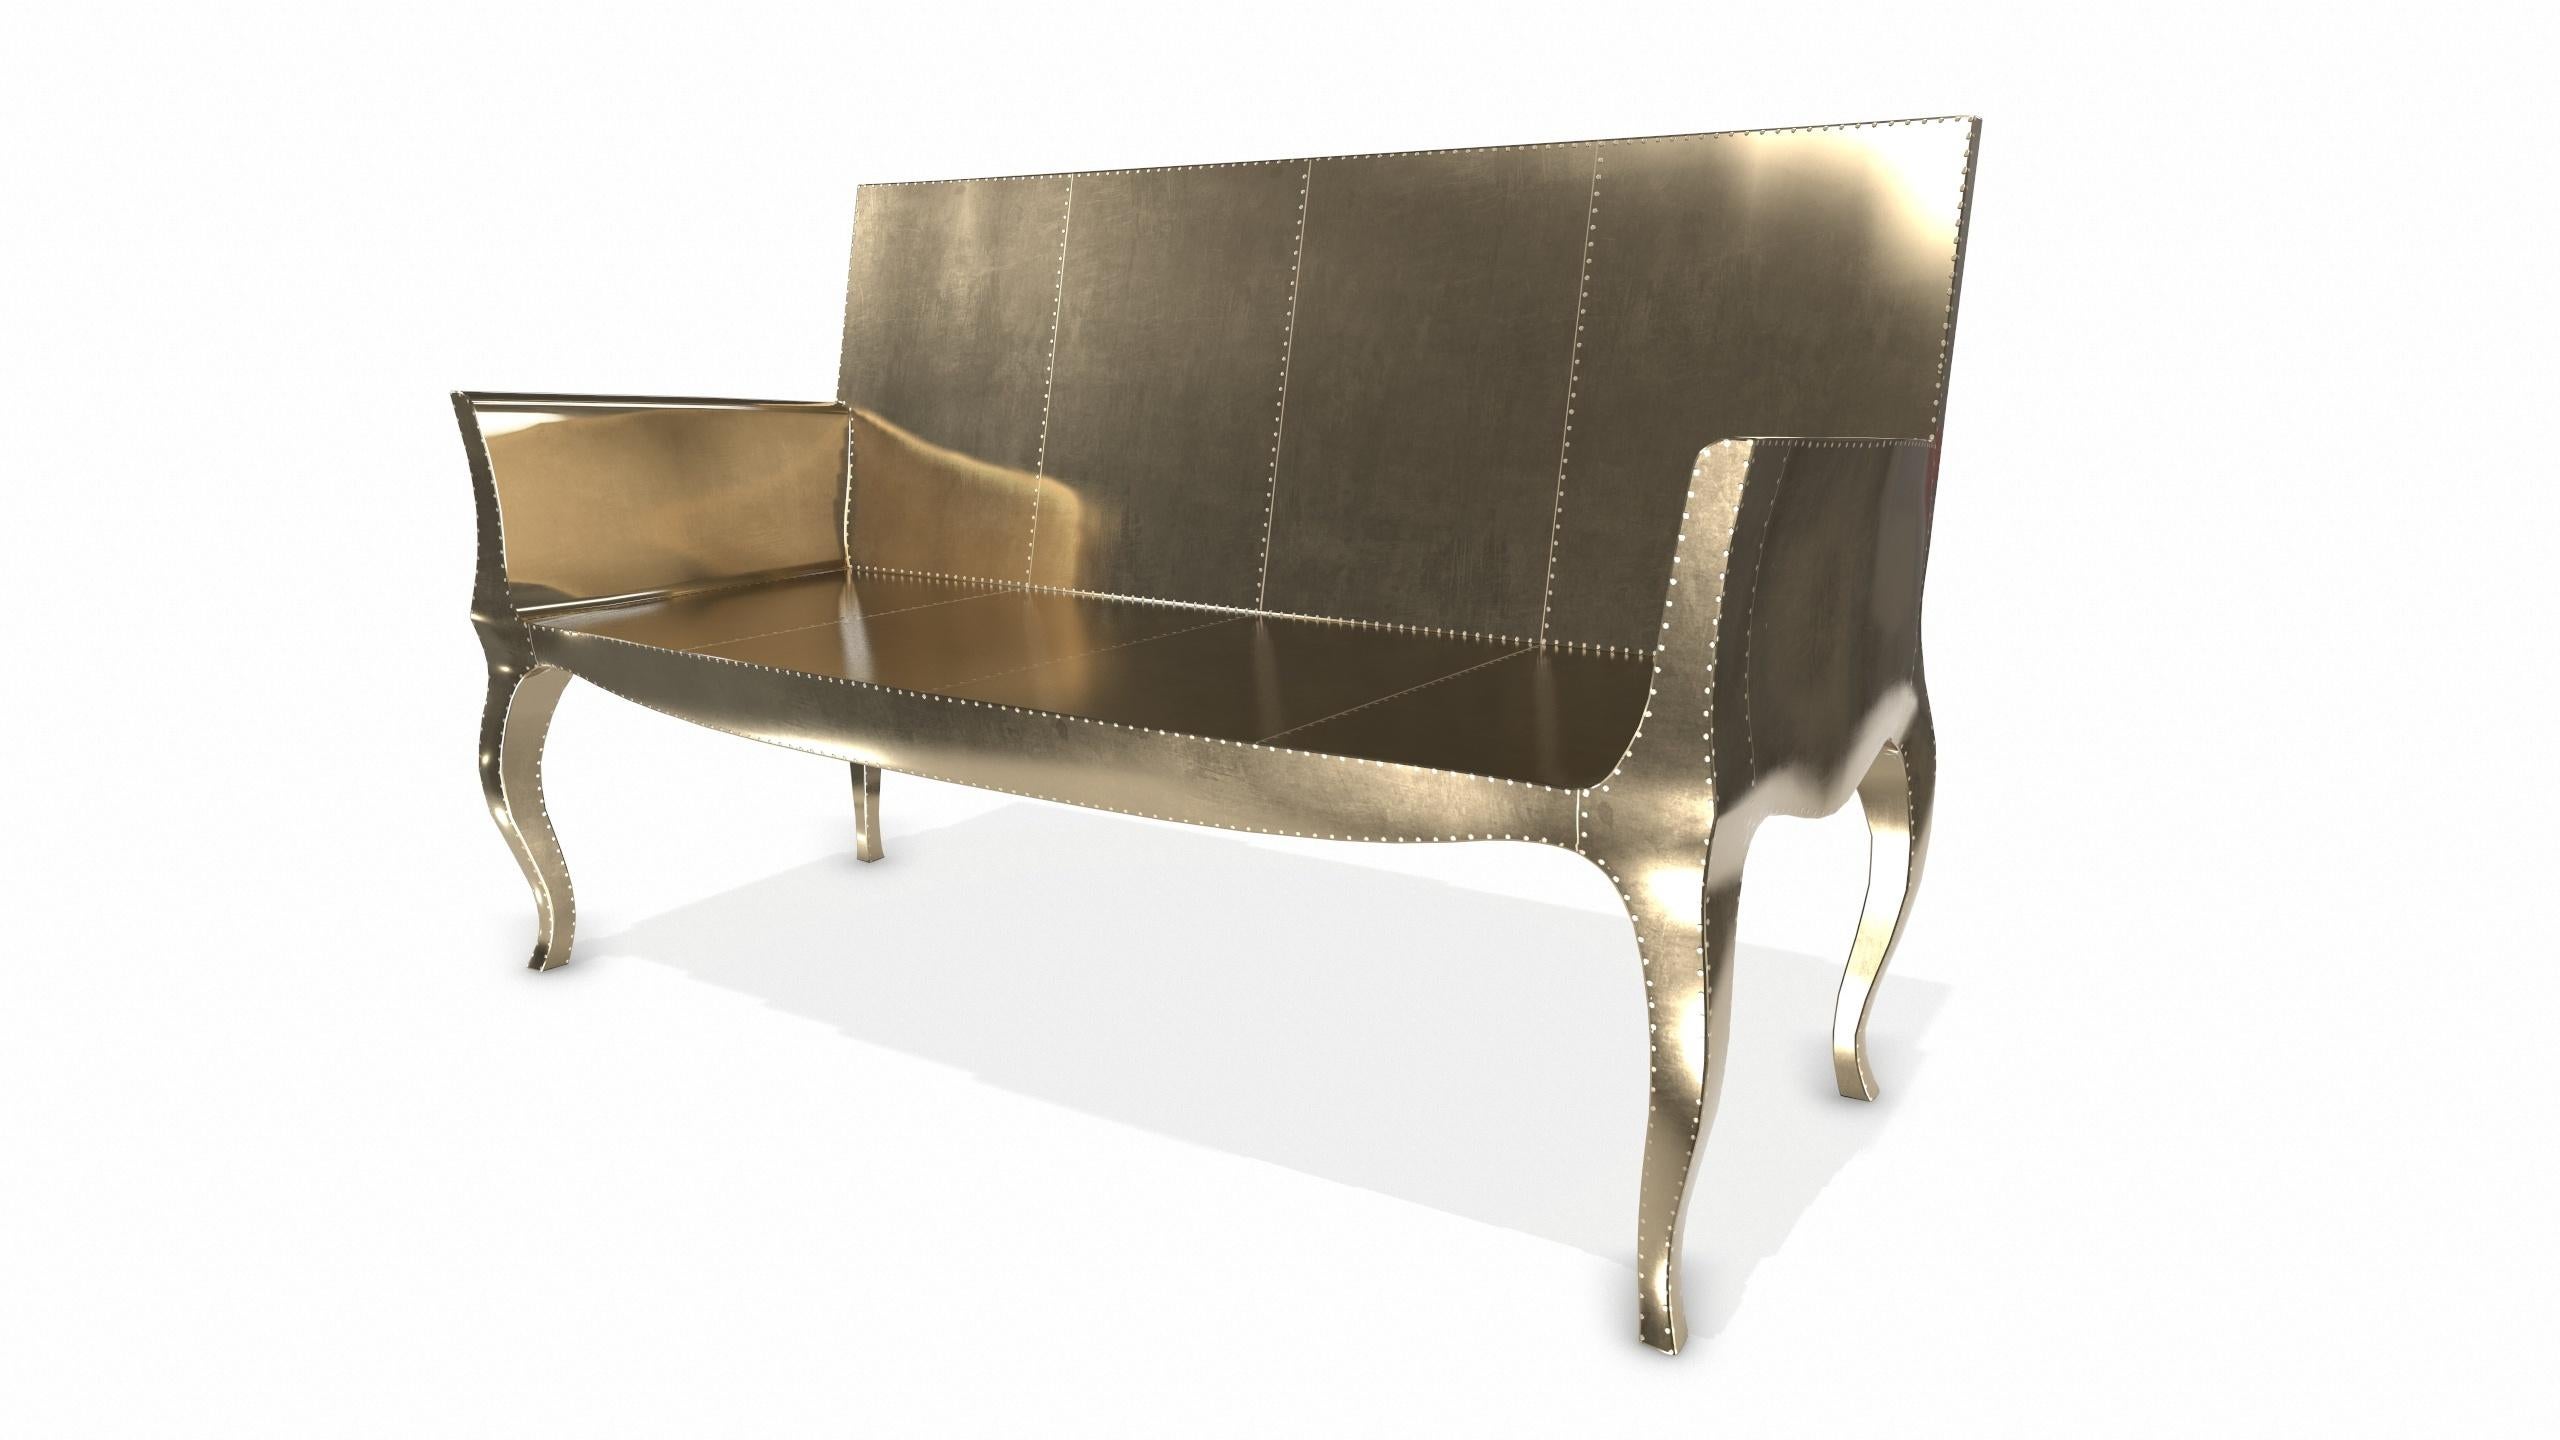 American Louise Settee Art Deco Benches in Smooth Brass by Paul Mathieu for S Odegard For Sale